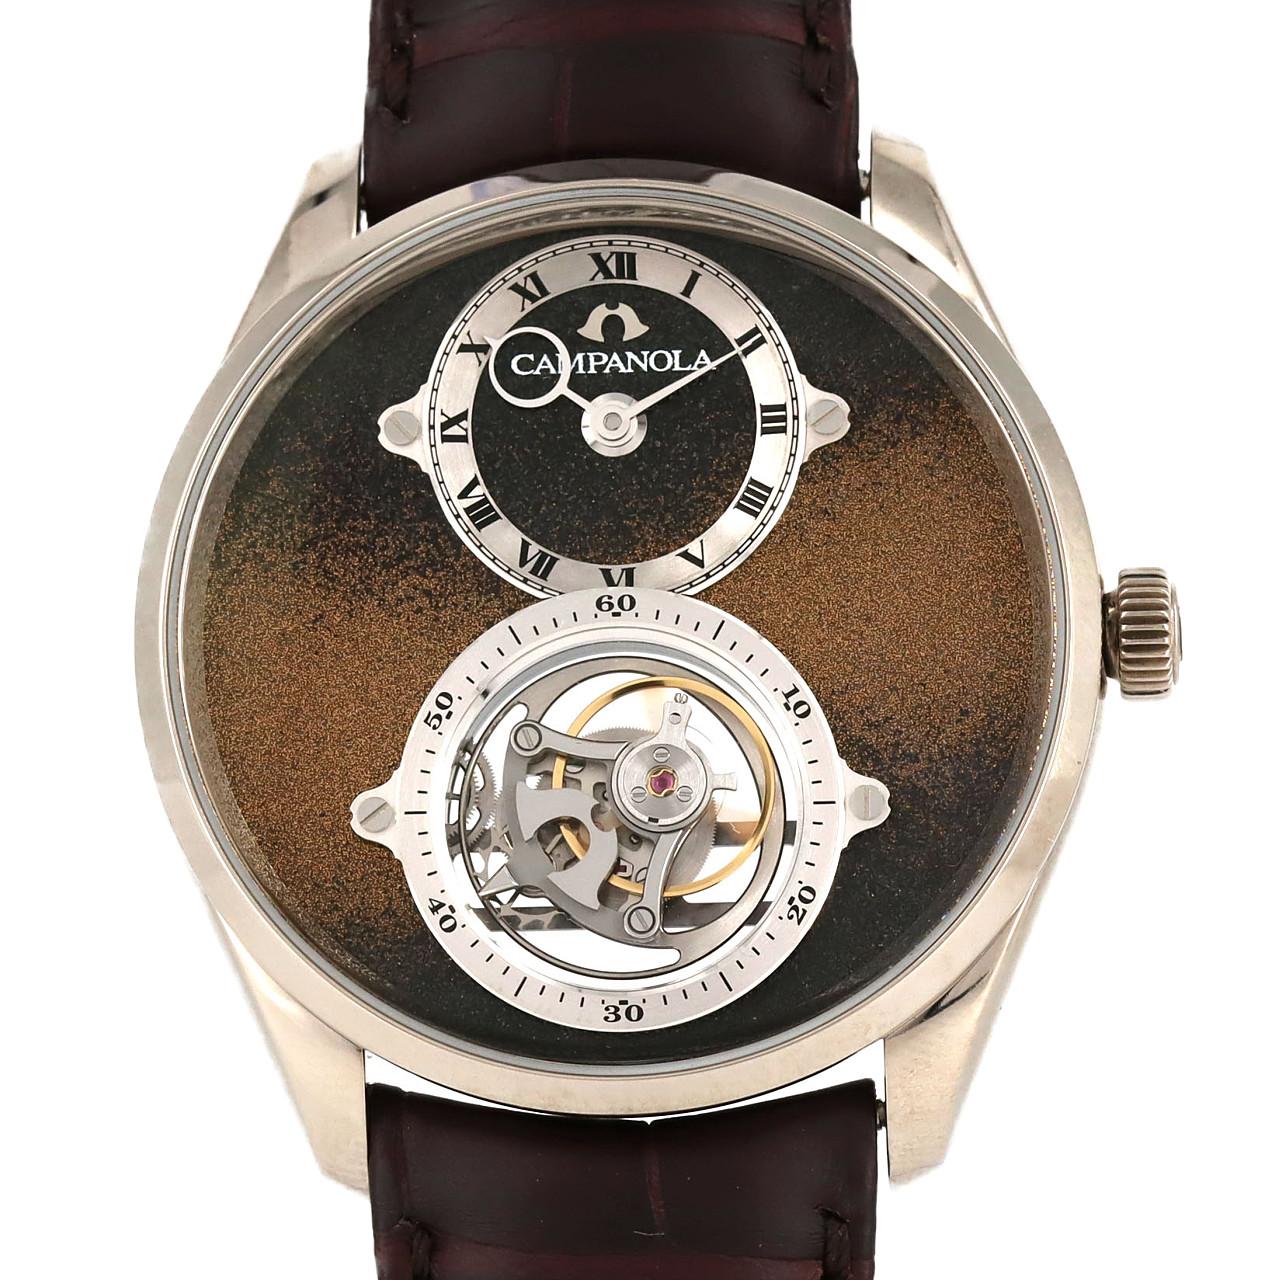 CITIZEN Campanola Flying Tourbillon WG LIMITED Y392-T027555/NZ3000-19P WG Manual Winding